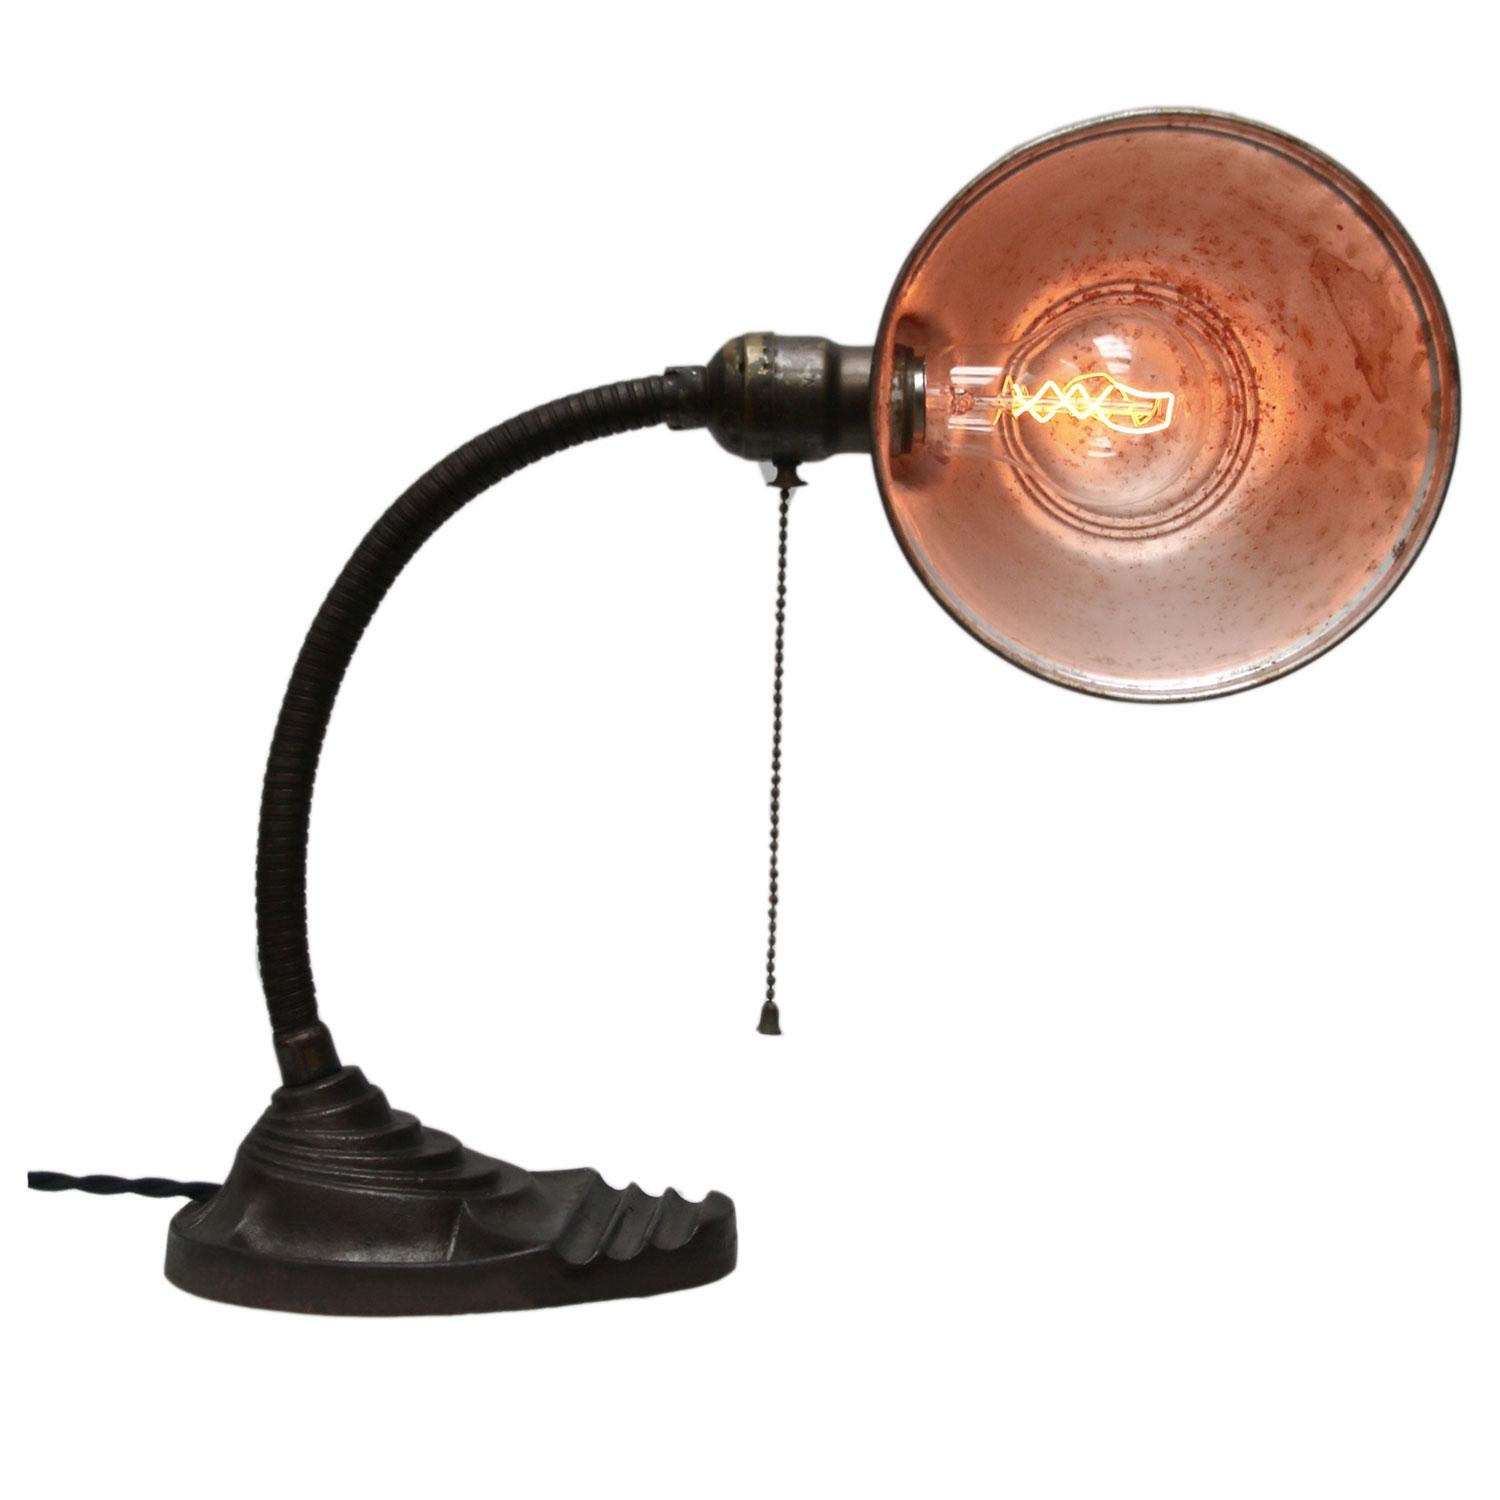 Brown American goose neck desk light.
flexible arm with metal shade.
cast iron base. black cotton wire and plug.

Weight: 1.30 kg / 2.9 lb

Priced per individual item. All lamps have been made suitable by international standards for